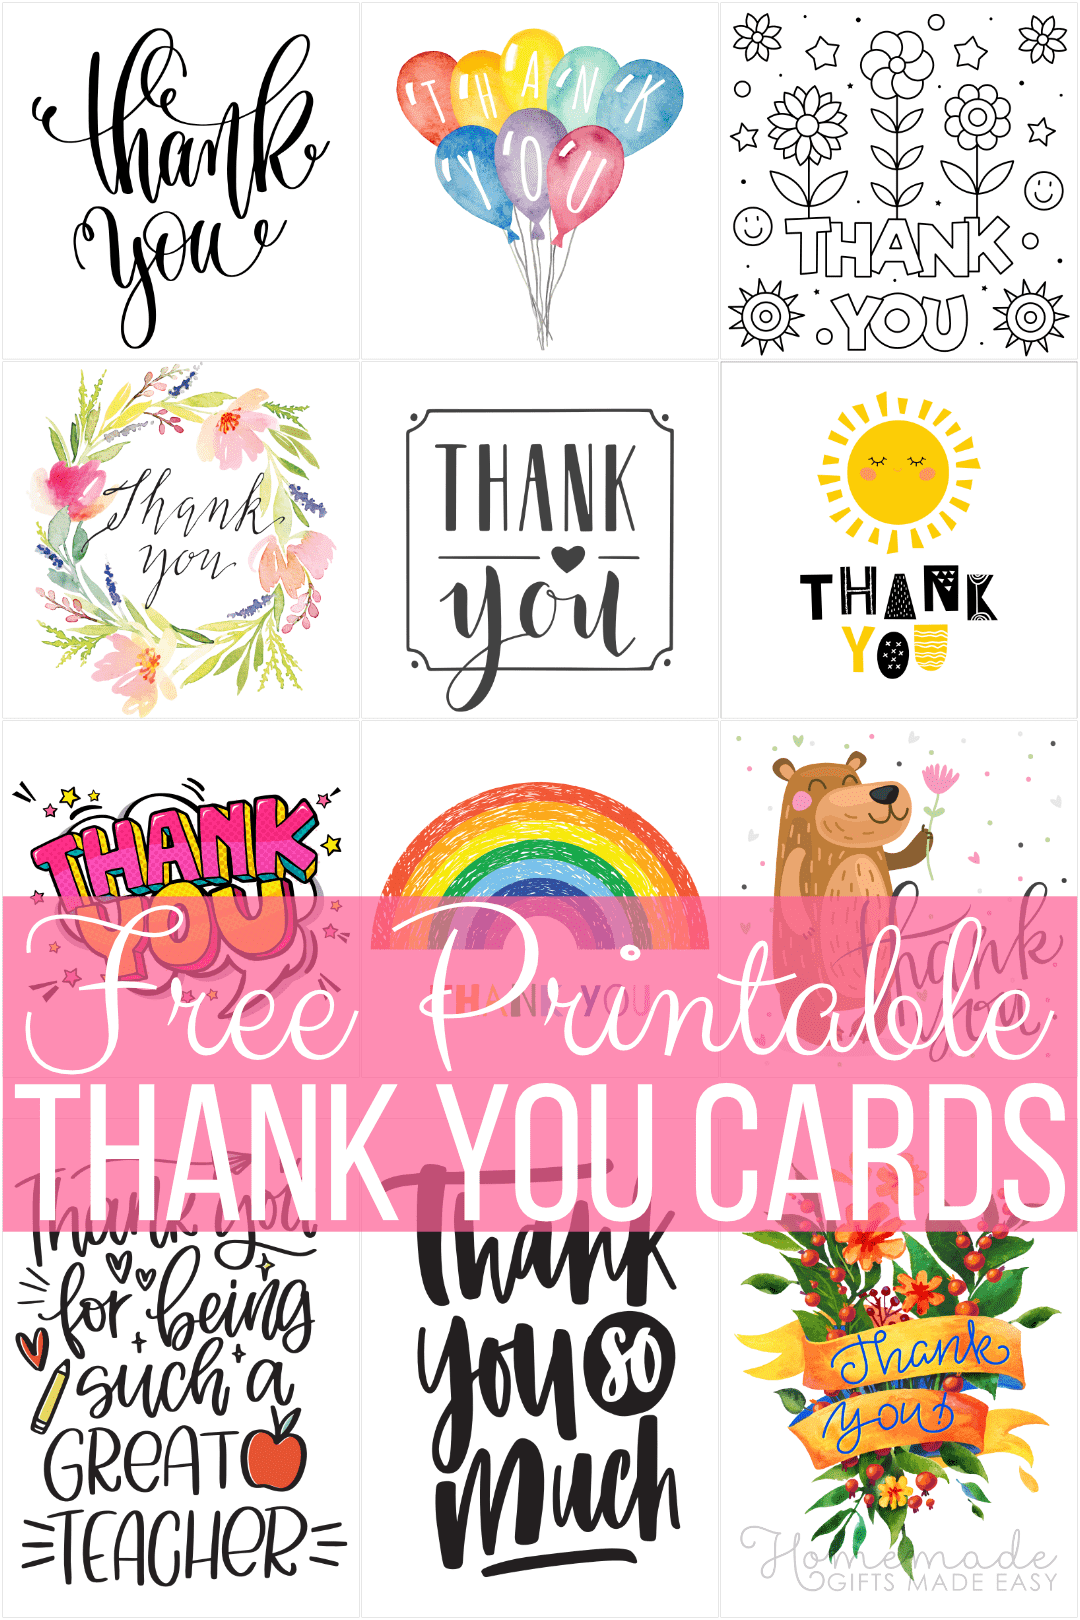 paper-party-supplies-paper-watercolor-note-cards-note-cards-digital